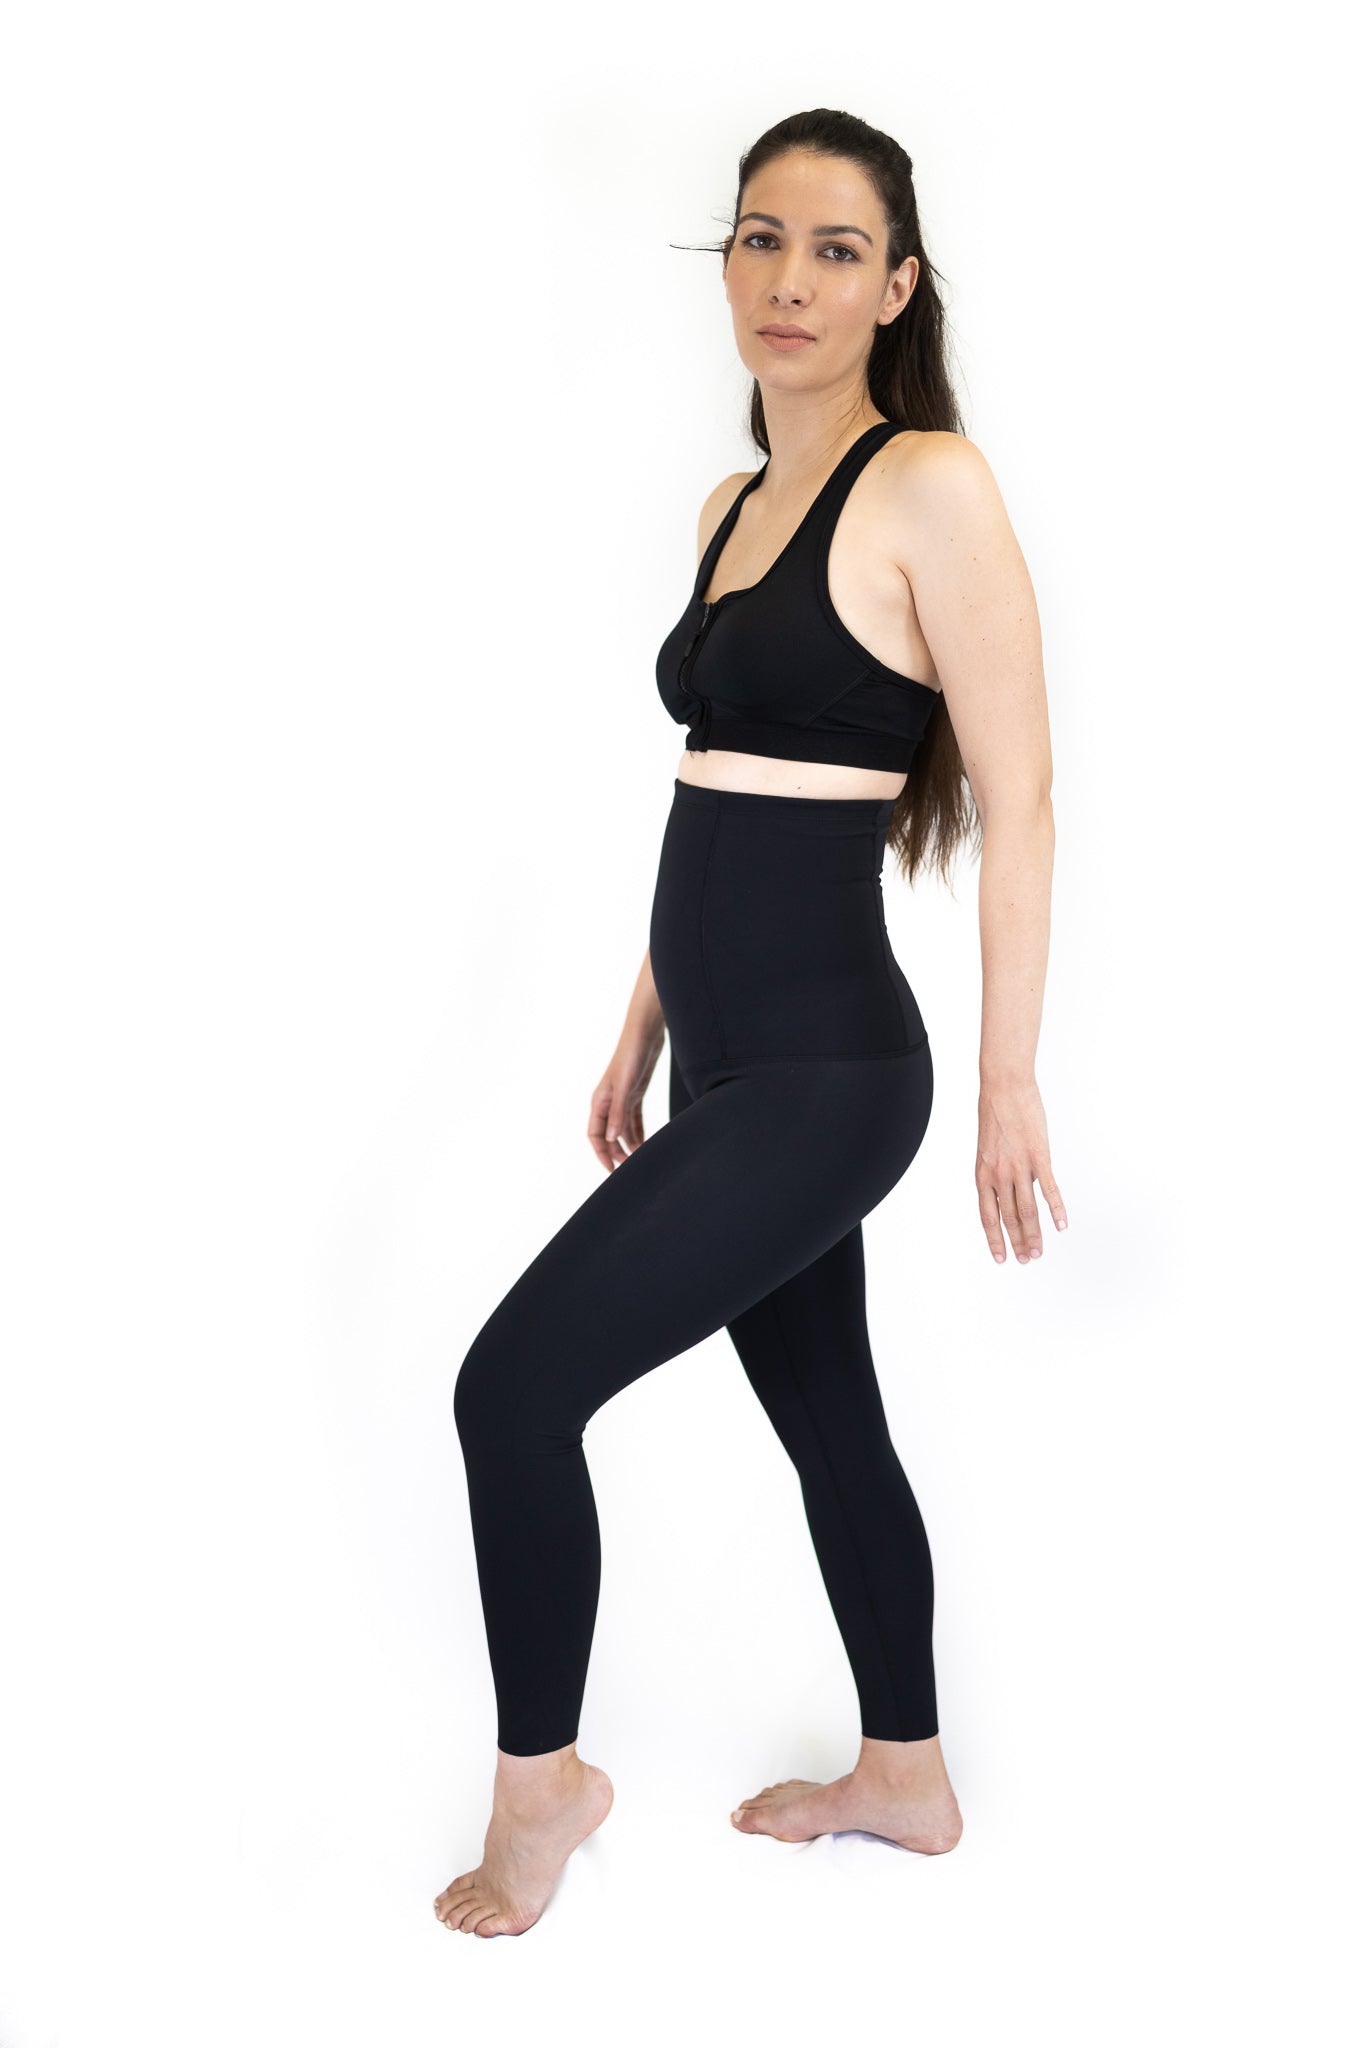 The mama physio reviews emamaco pregnancy recovery leggings #emamaco #